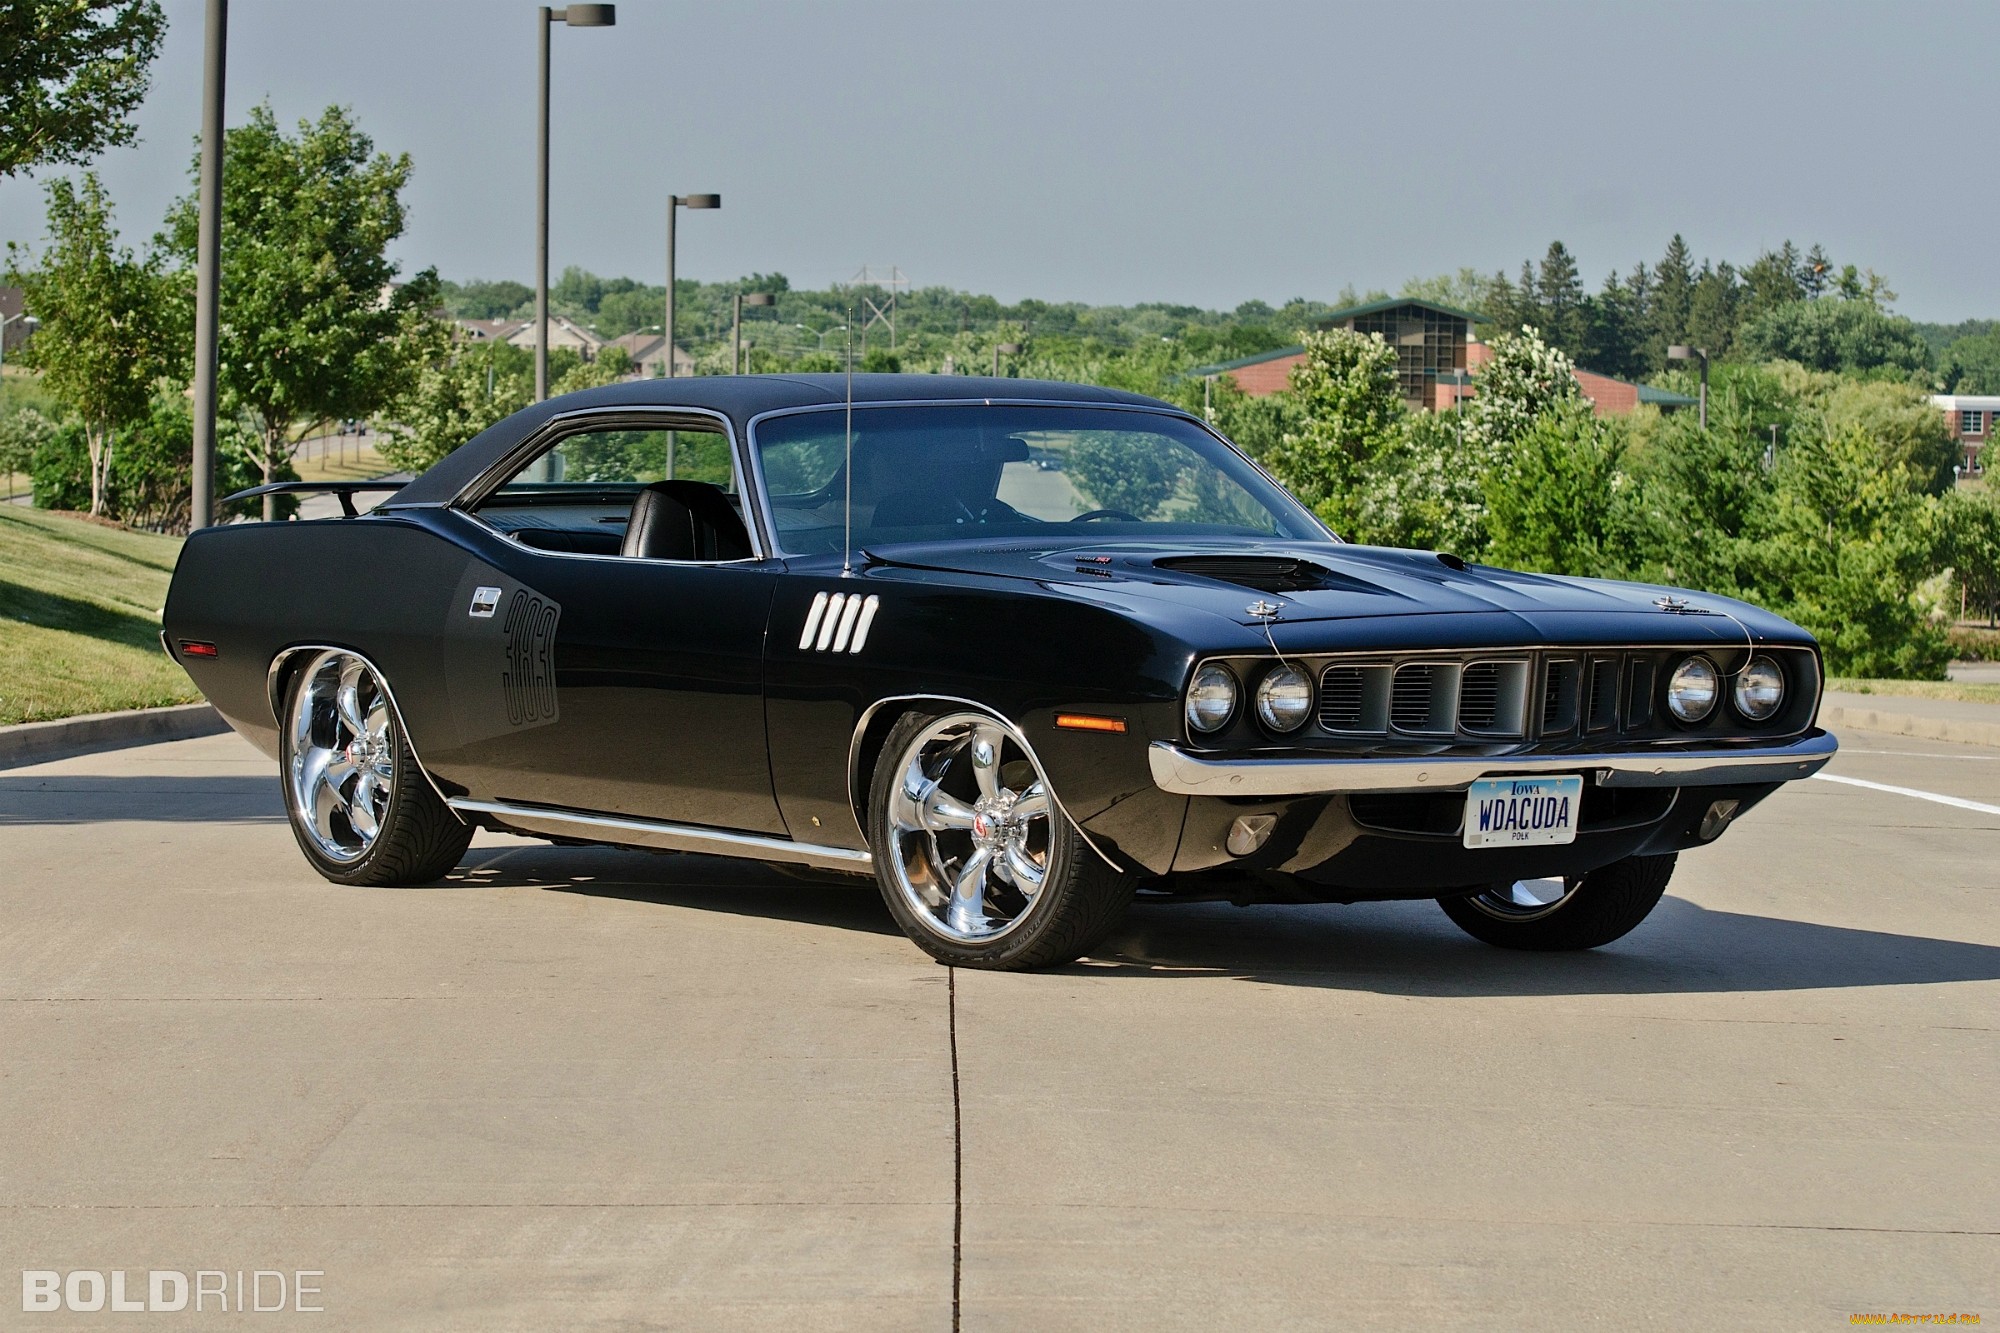 vehicles, plymouth barracuda, plymouth